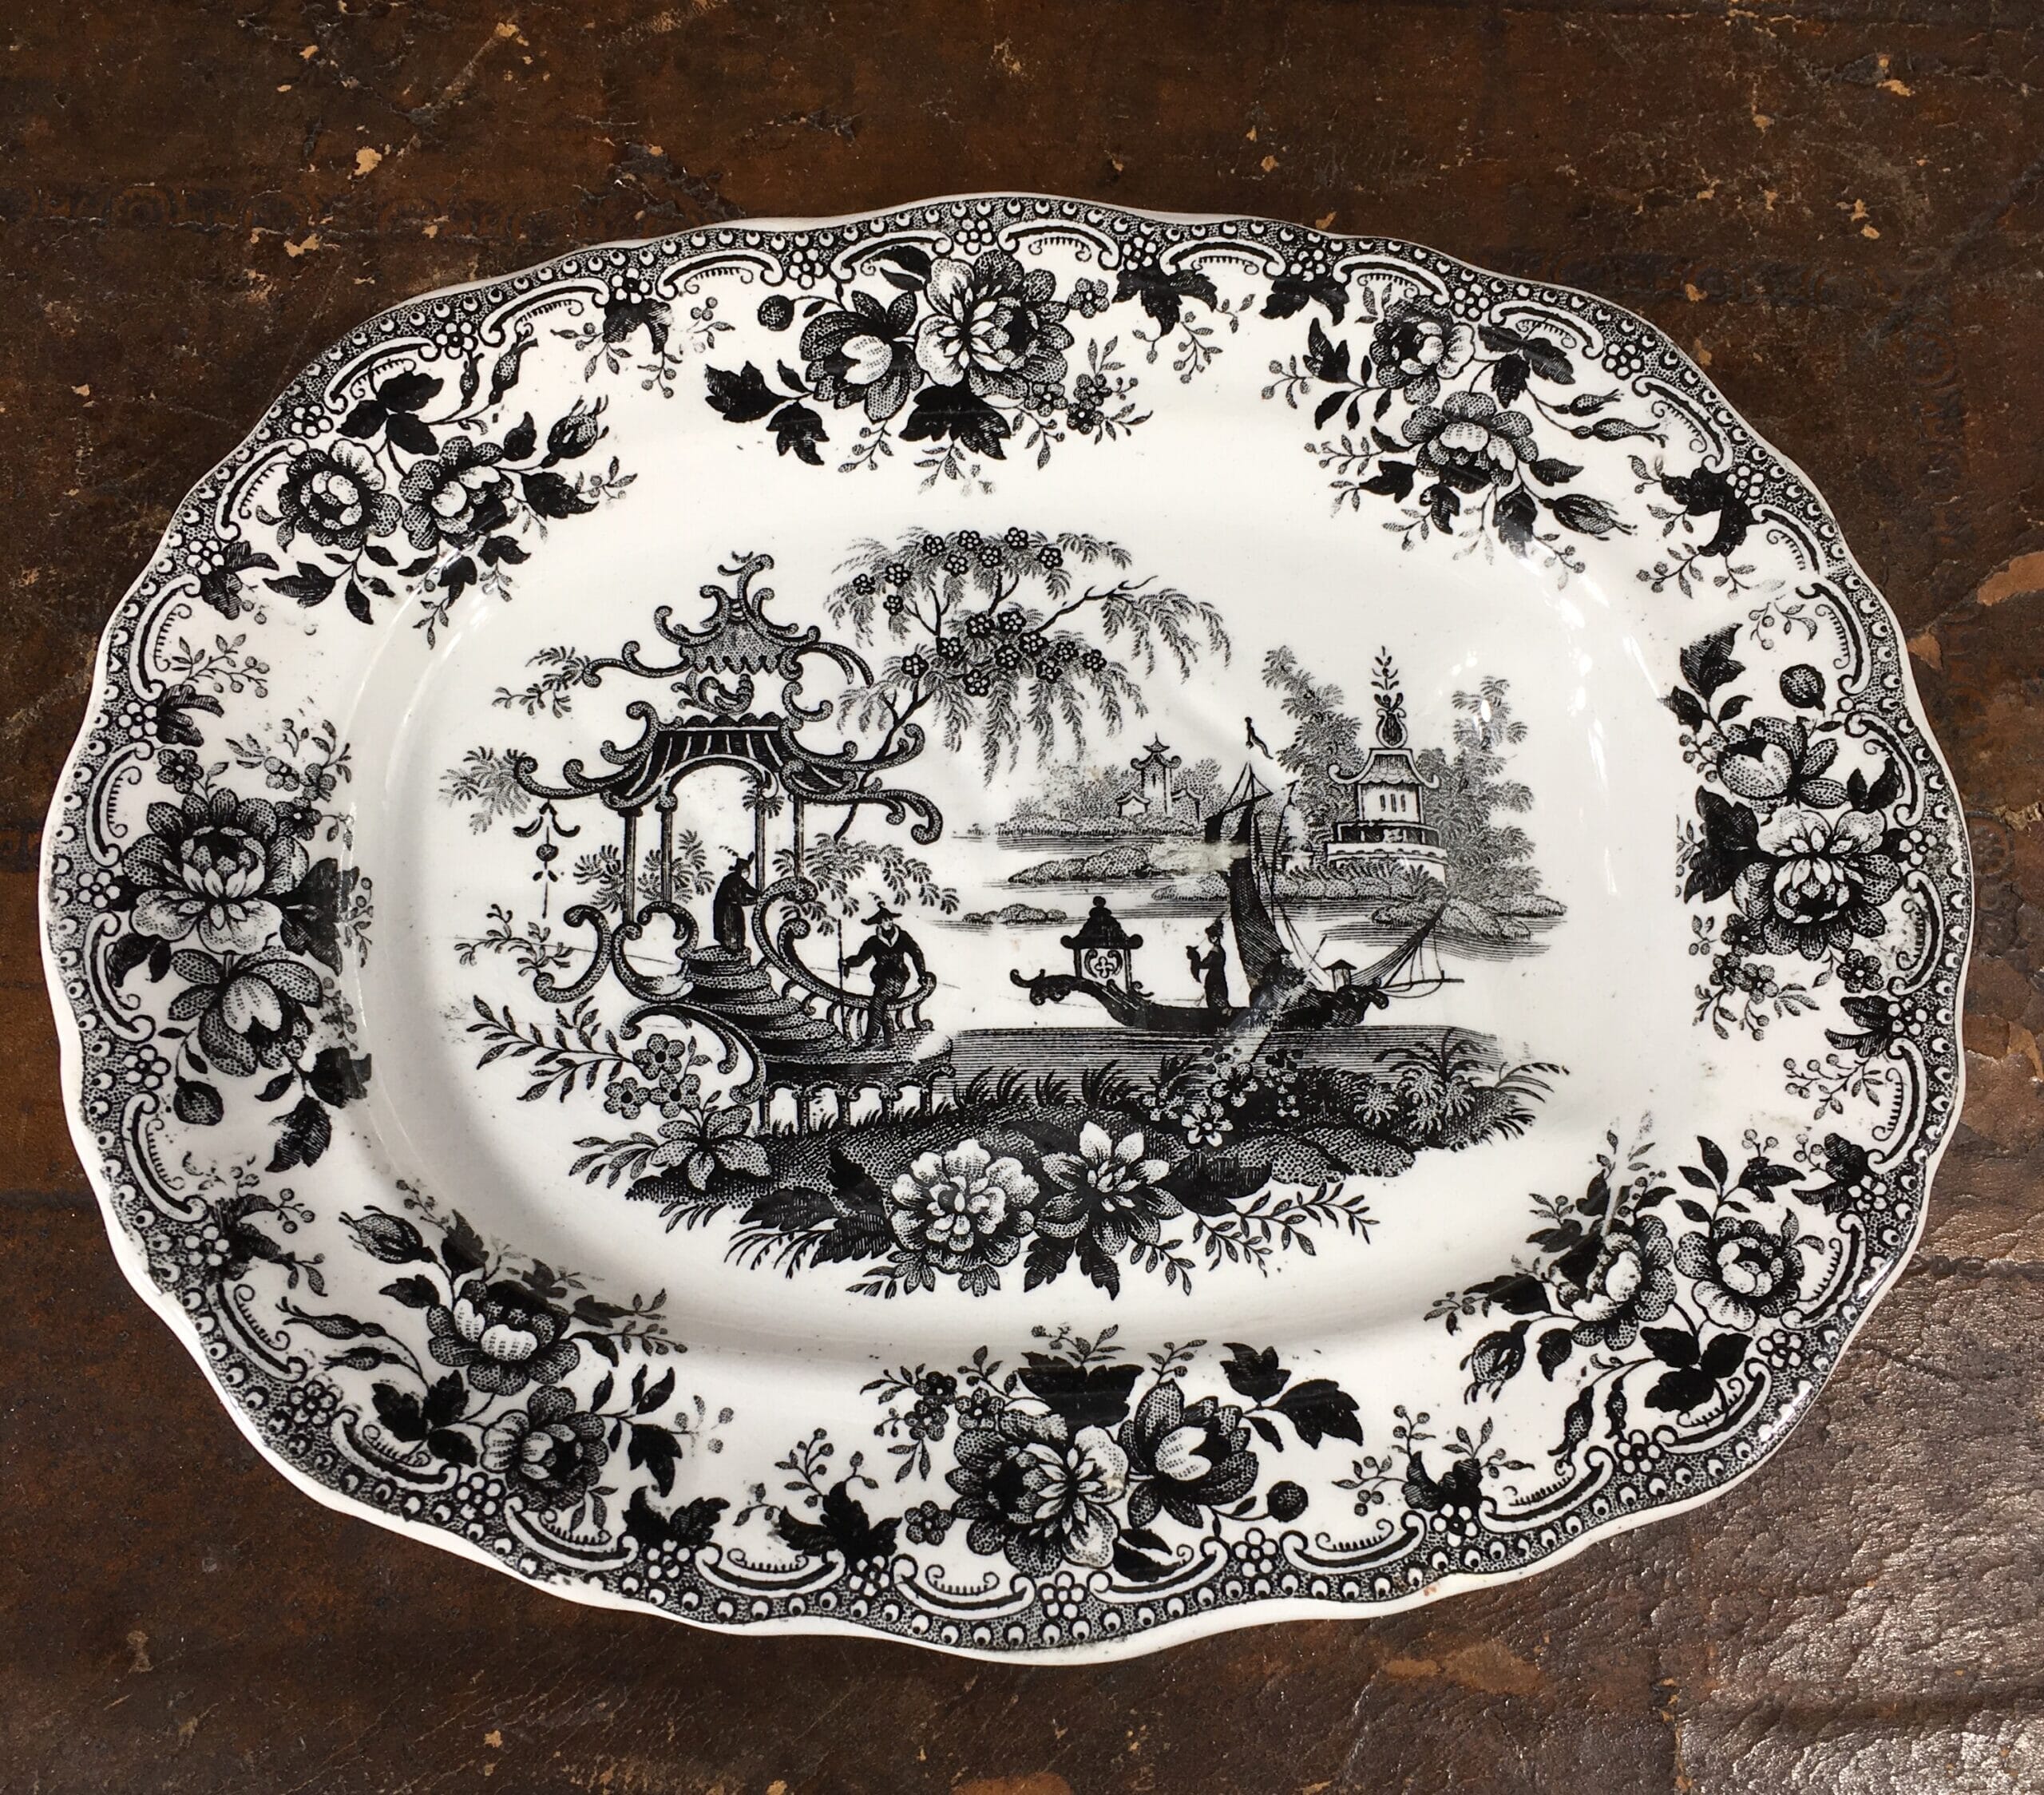 Childs service meat platter 'well & tree' black chinoiserie prints, c. 1840-0